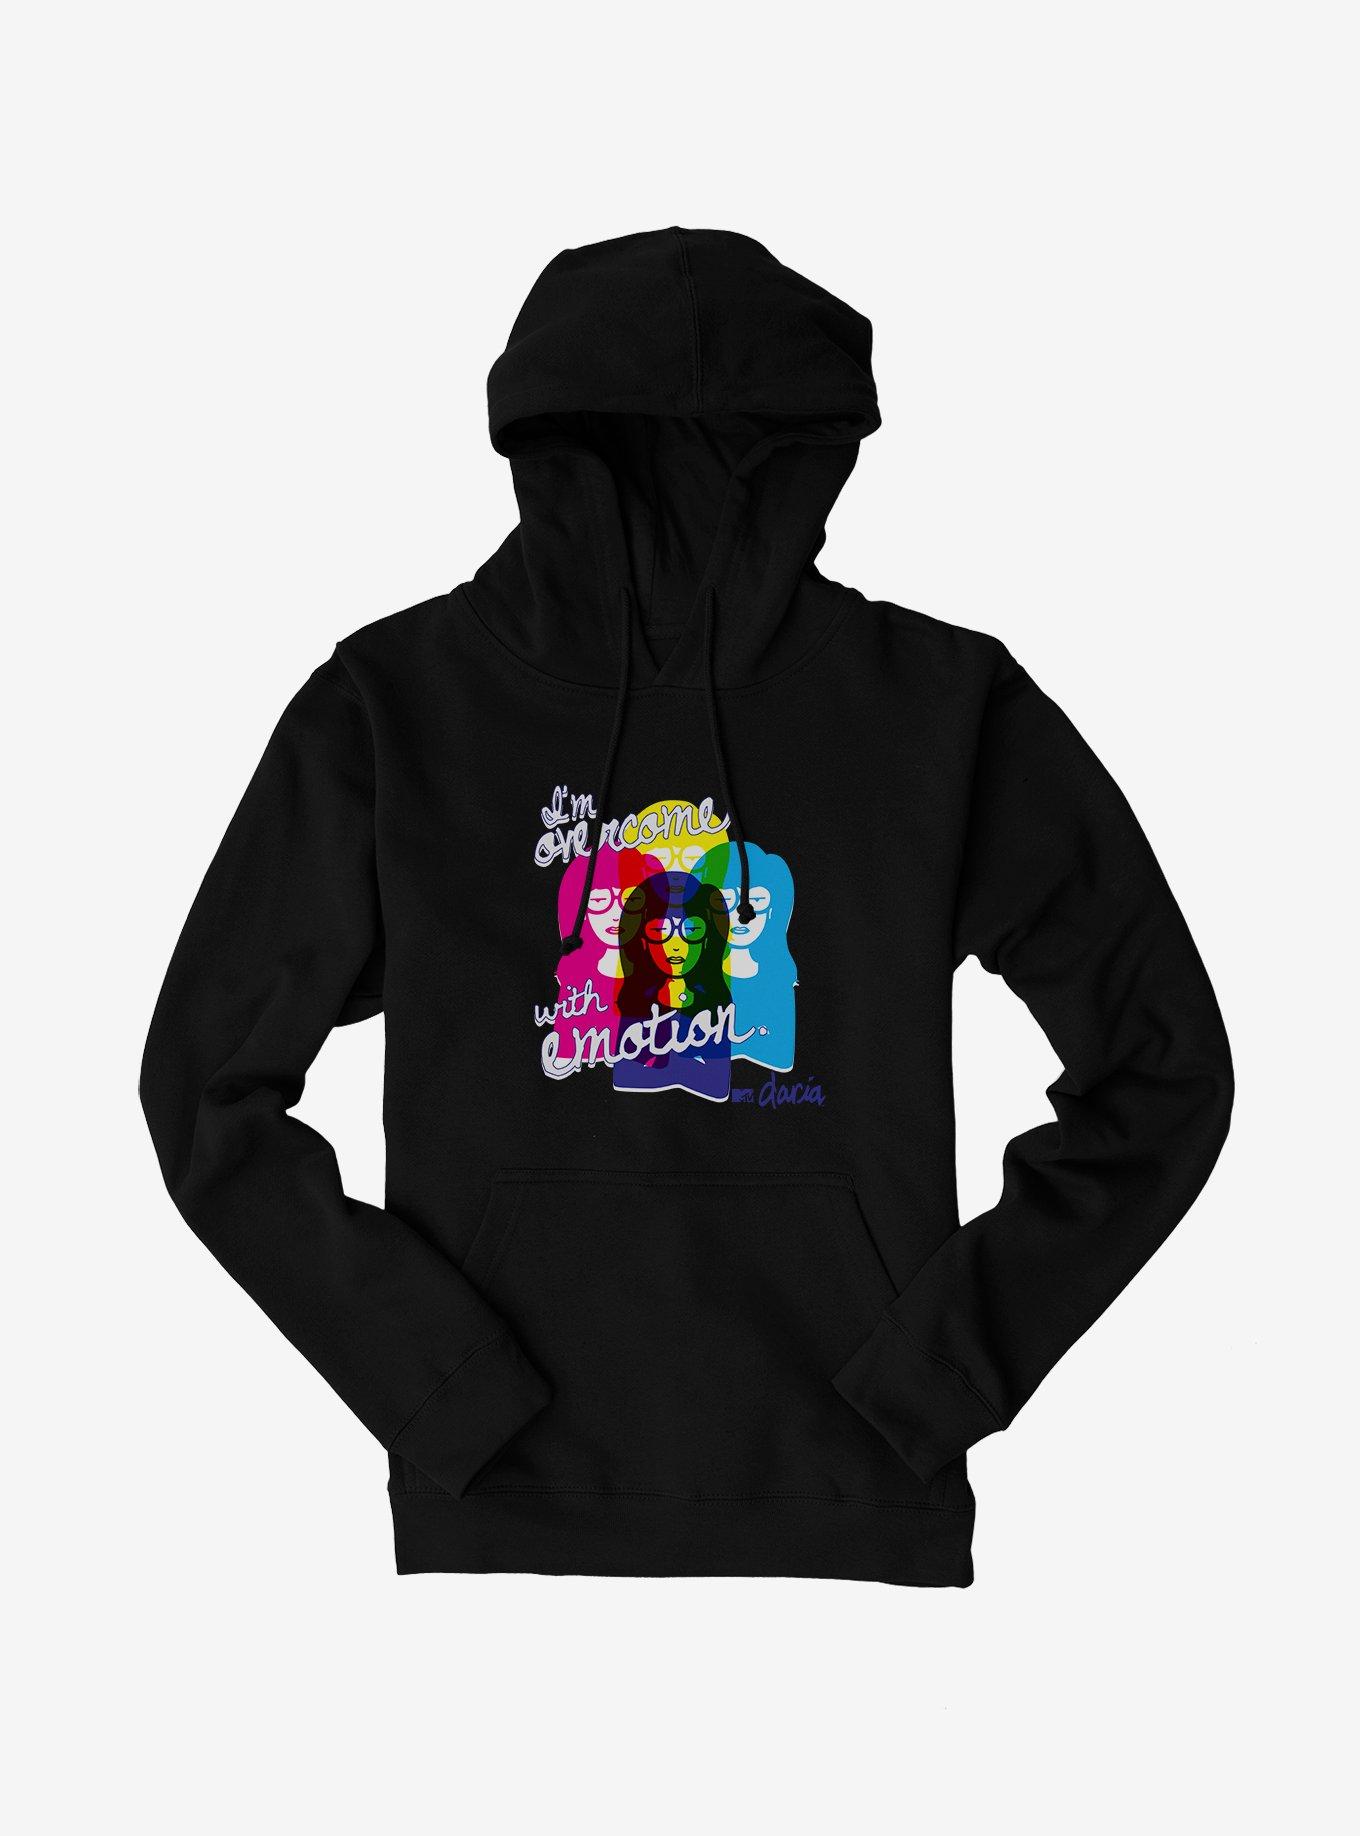 Daria Overcome With Emotion Hoodie, , hi-res